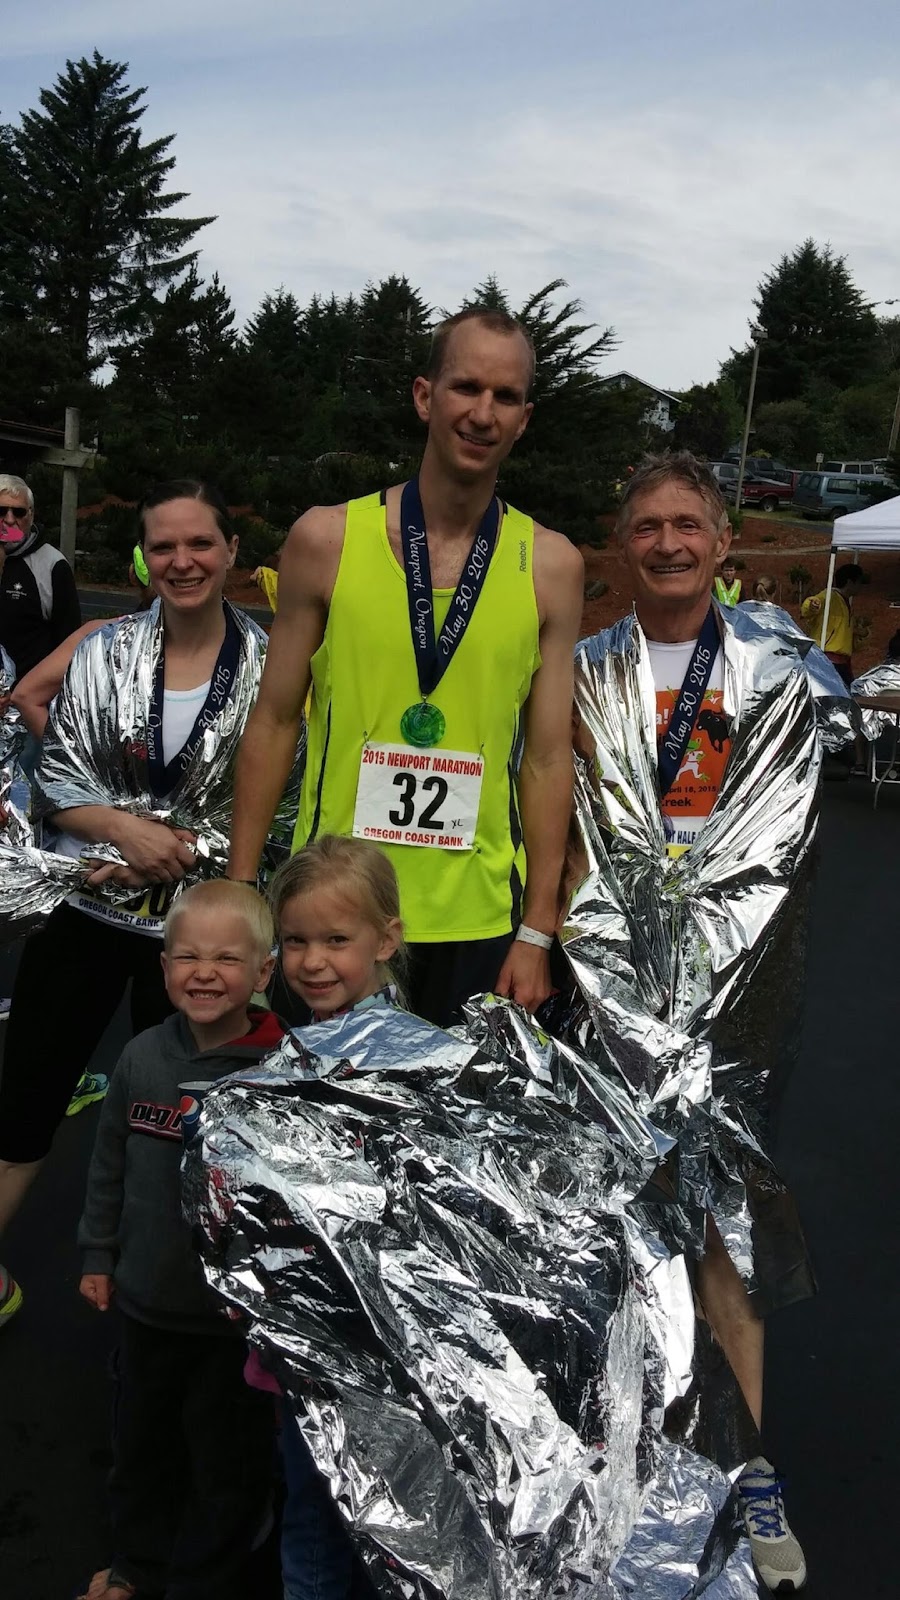 Me, Jerry, Kara, and the kids right after finishing the Newport Marathon